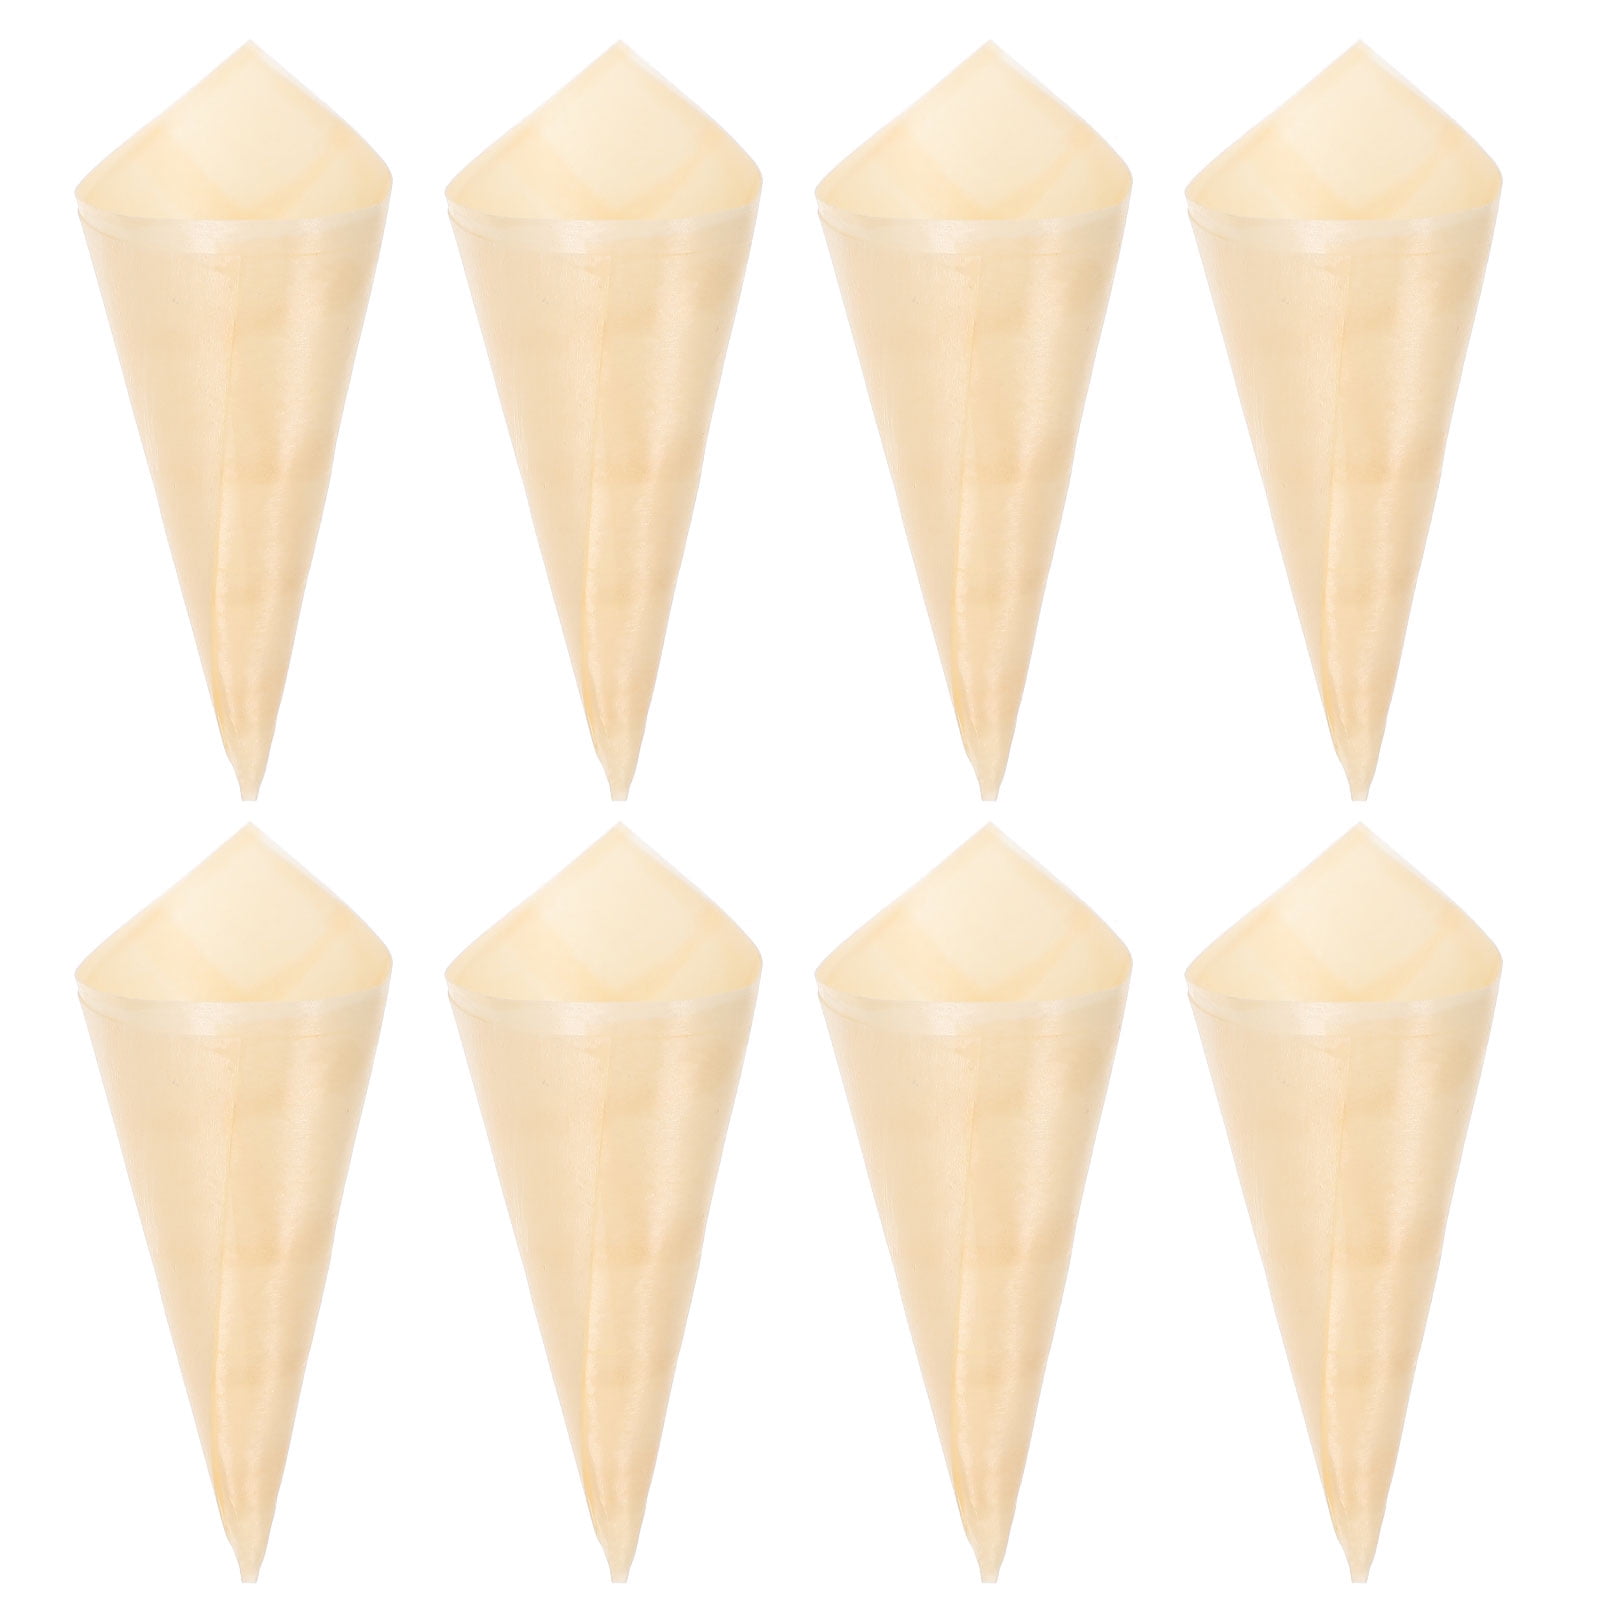 50pcs Disposable Wood Appetizer Cones Ice Cream Cone Cups Party Candy Cones 